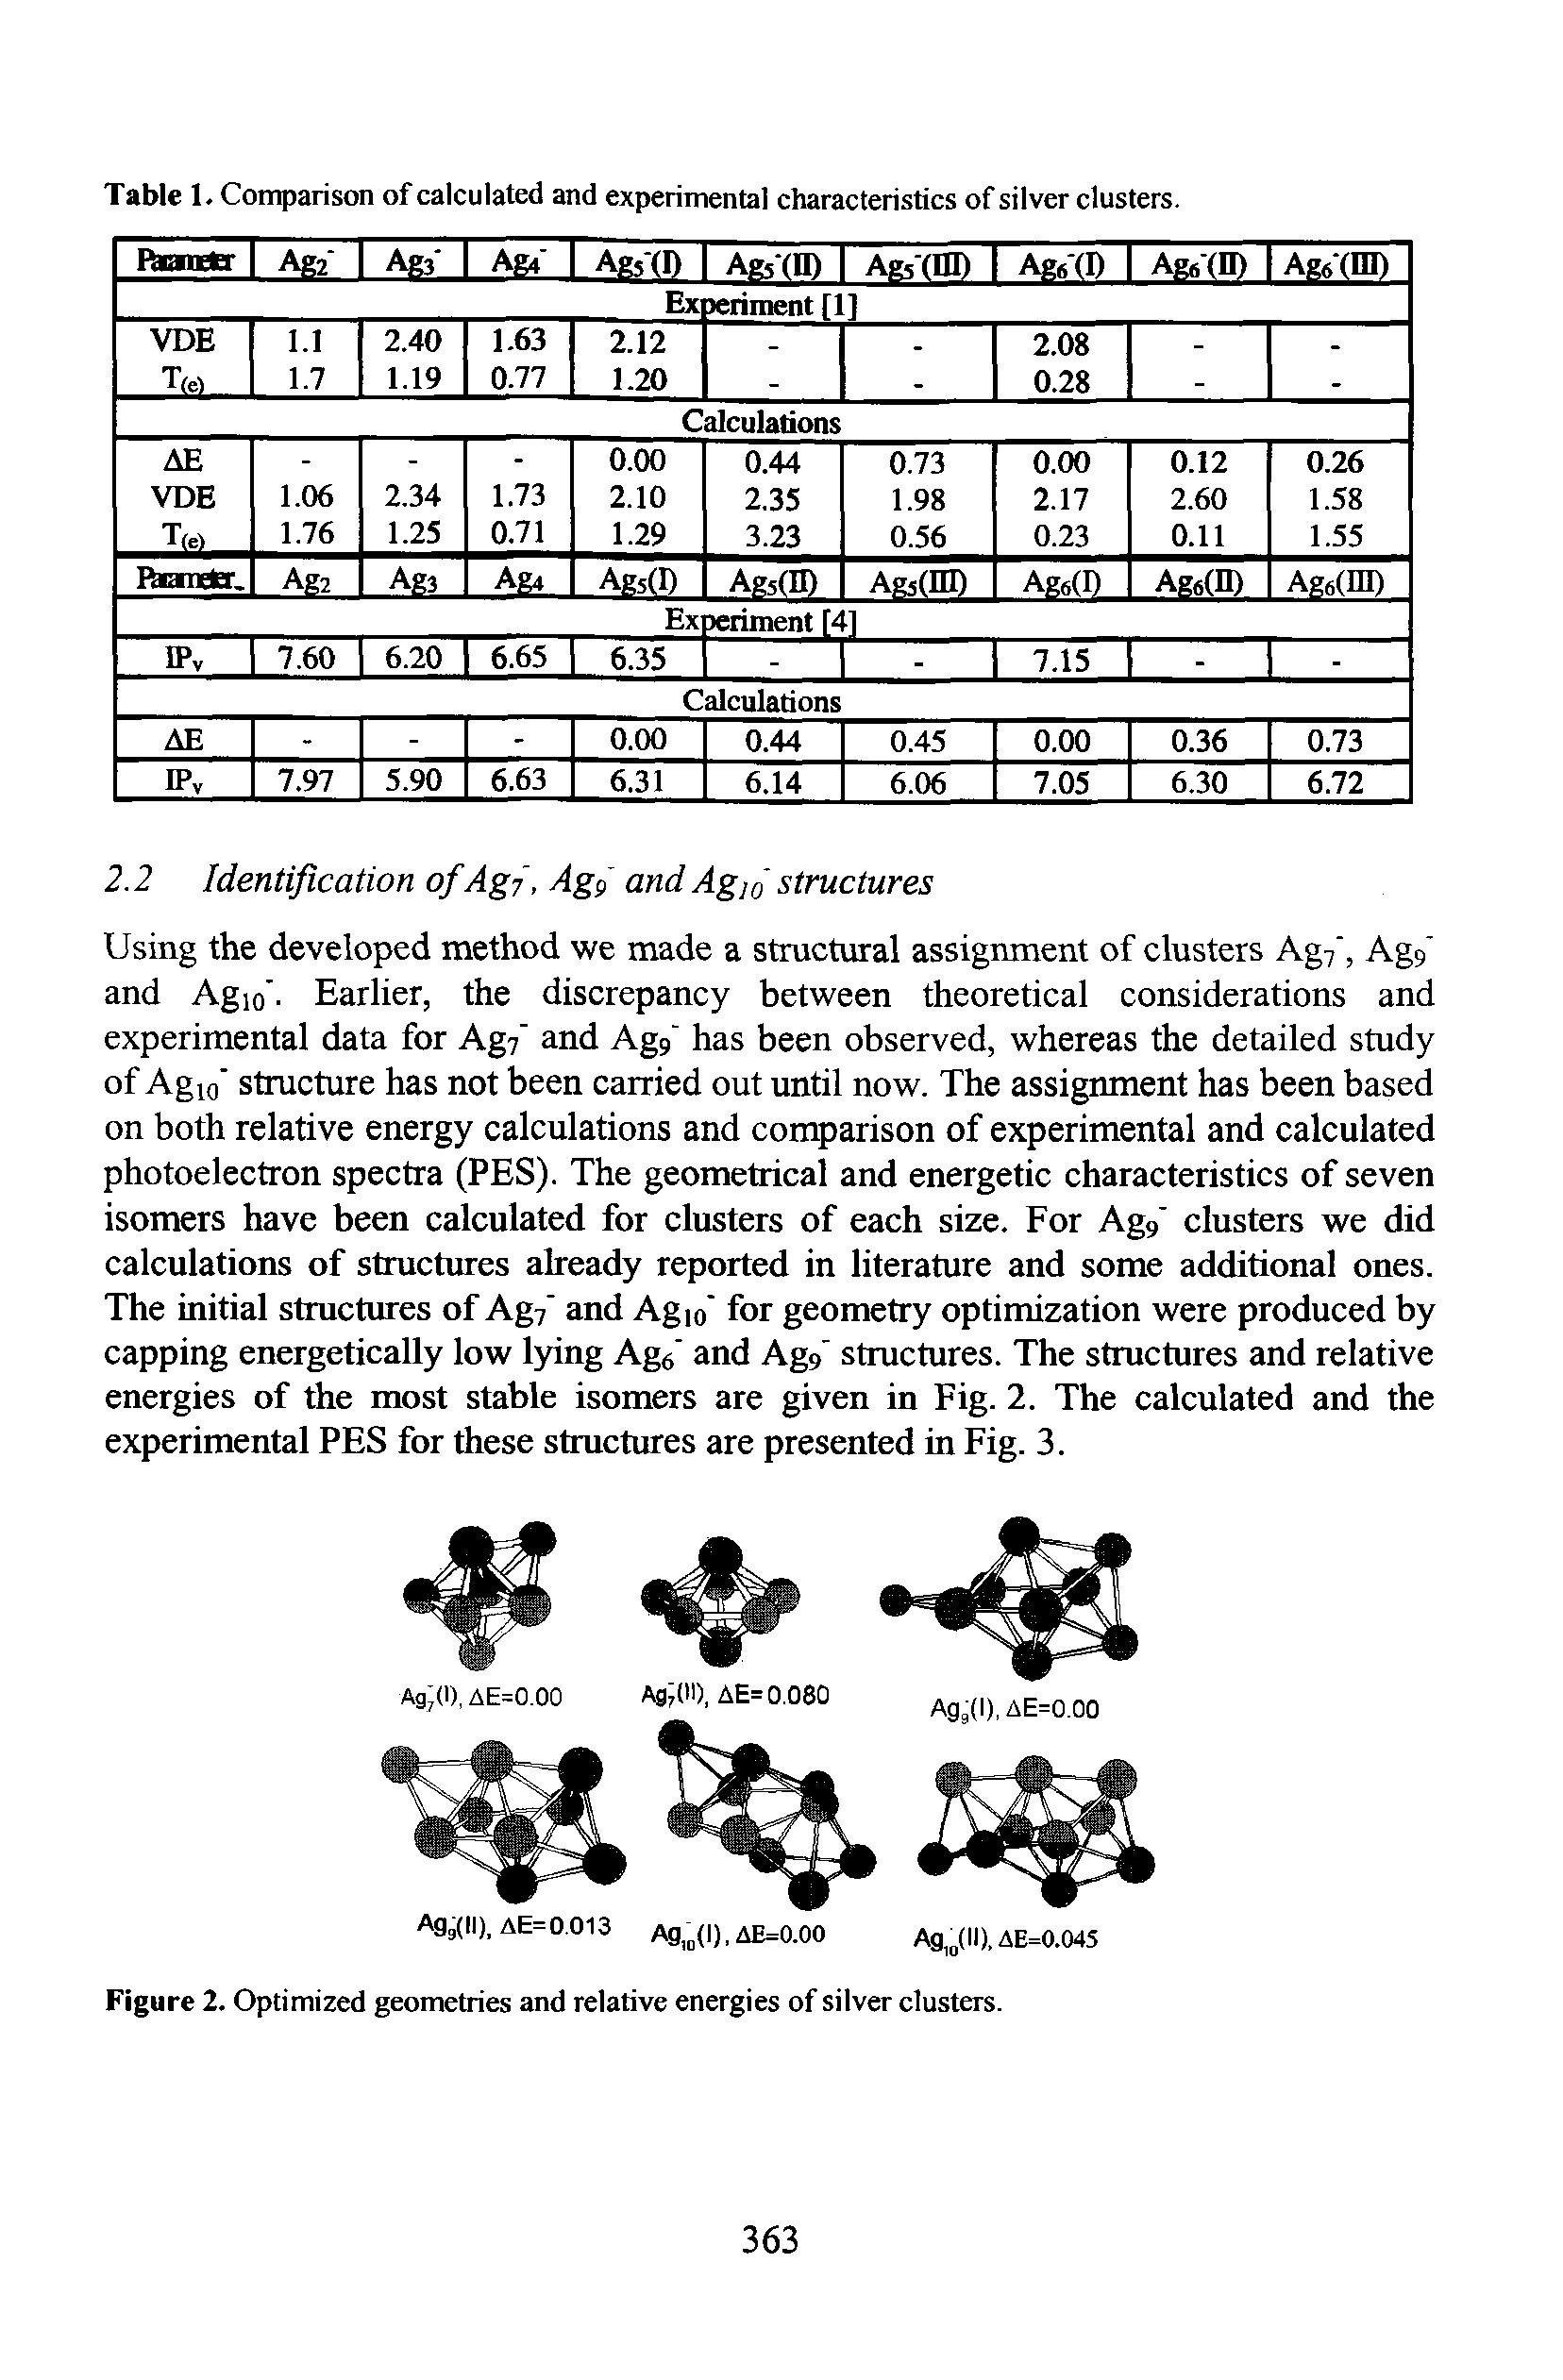 Figure 2. Optimized geometries and relative energies of silver clusters.